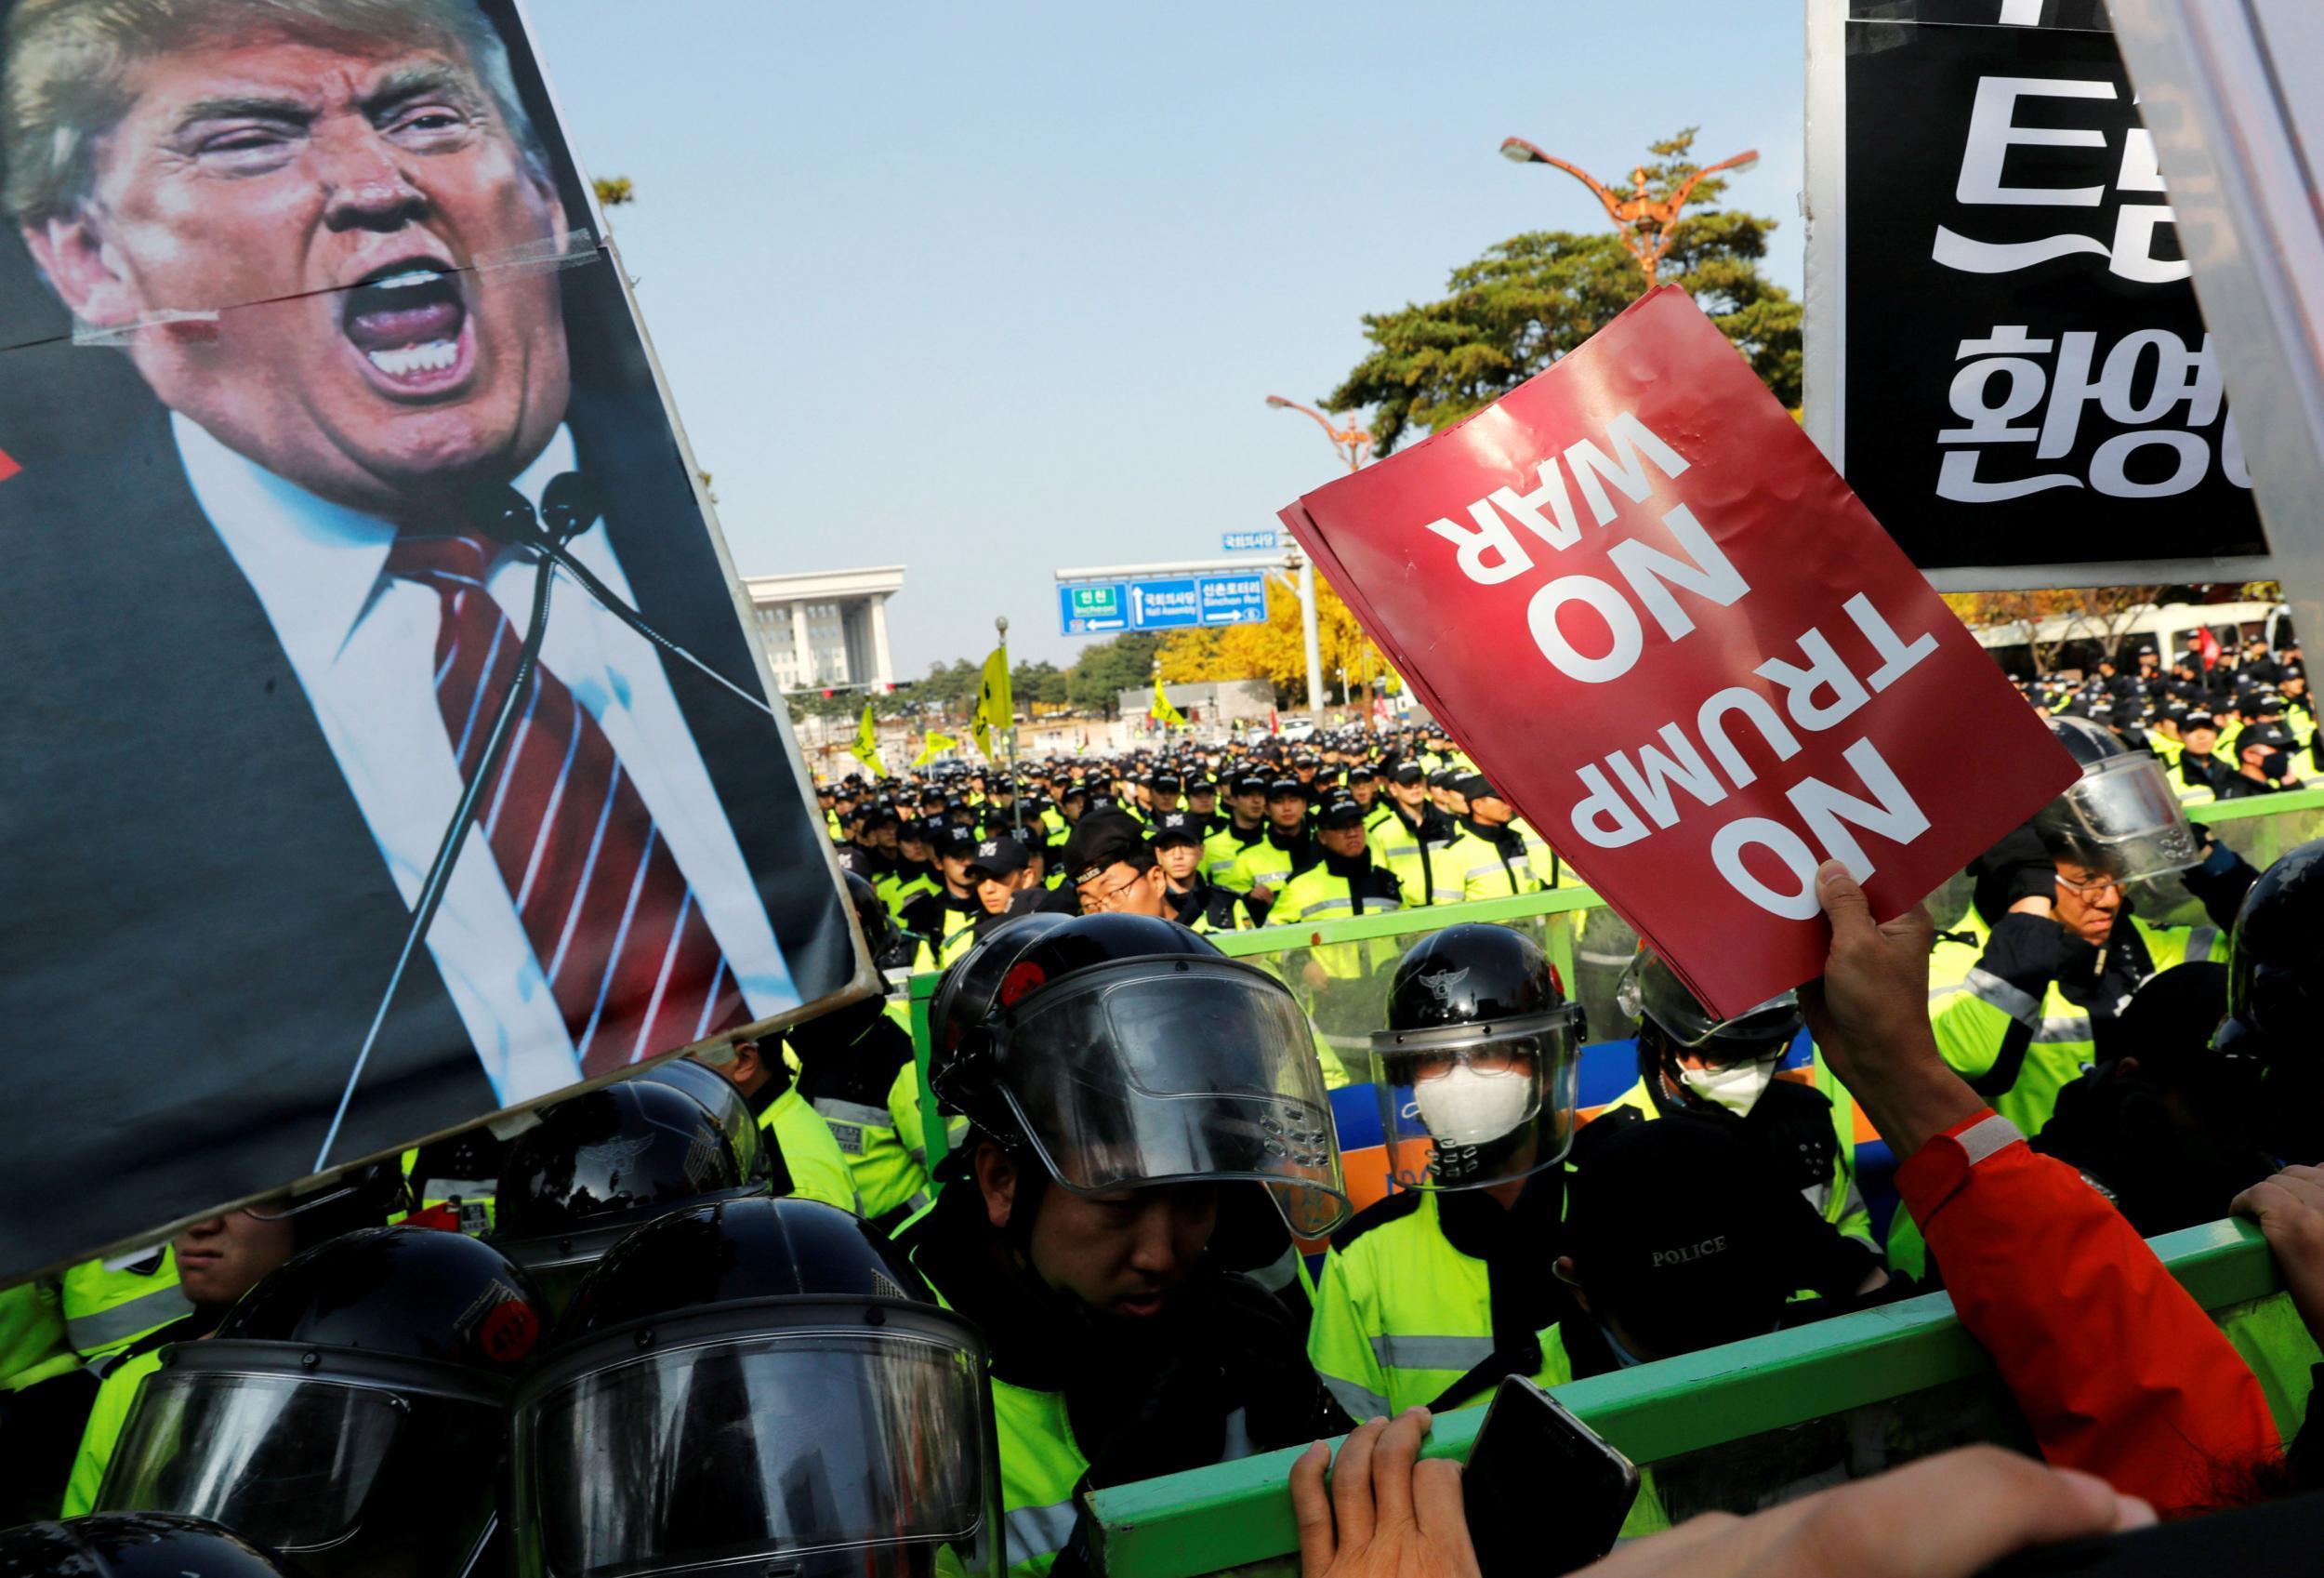 Protesters take part in an anti-Trump rally near the presidential Blue House in central Seoul, South Korea, during his visit